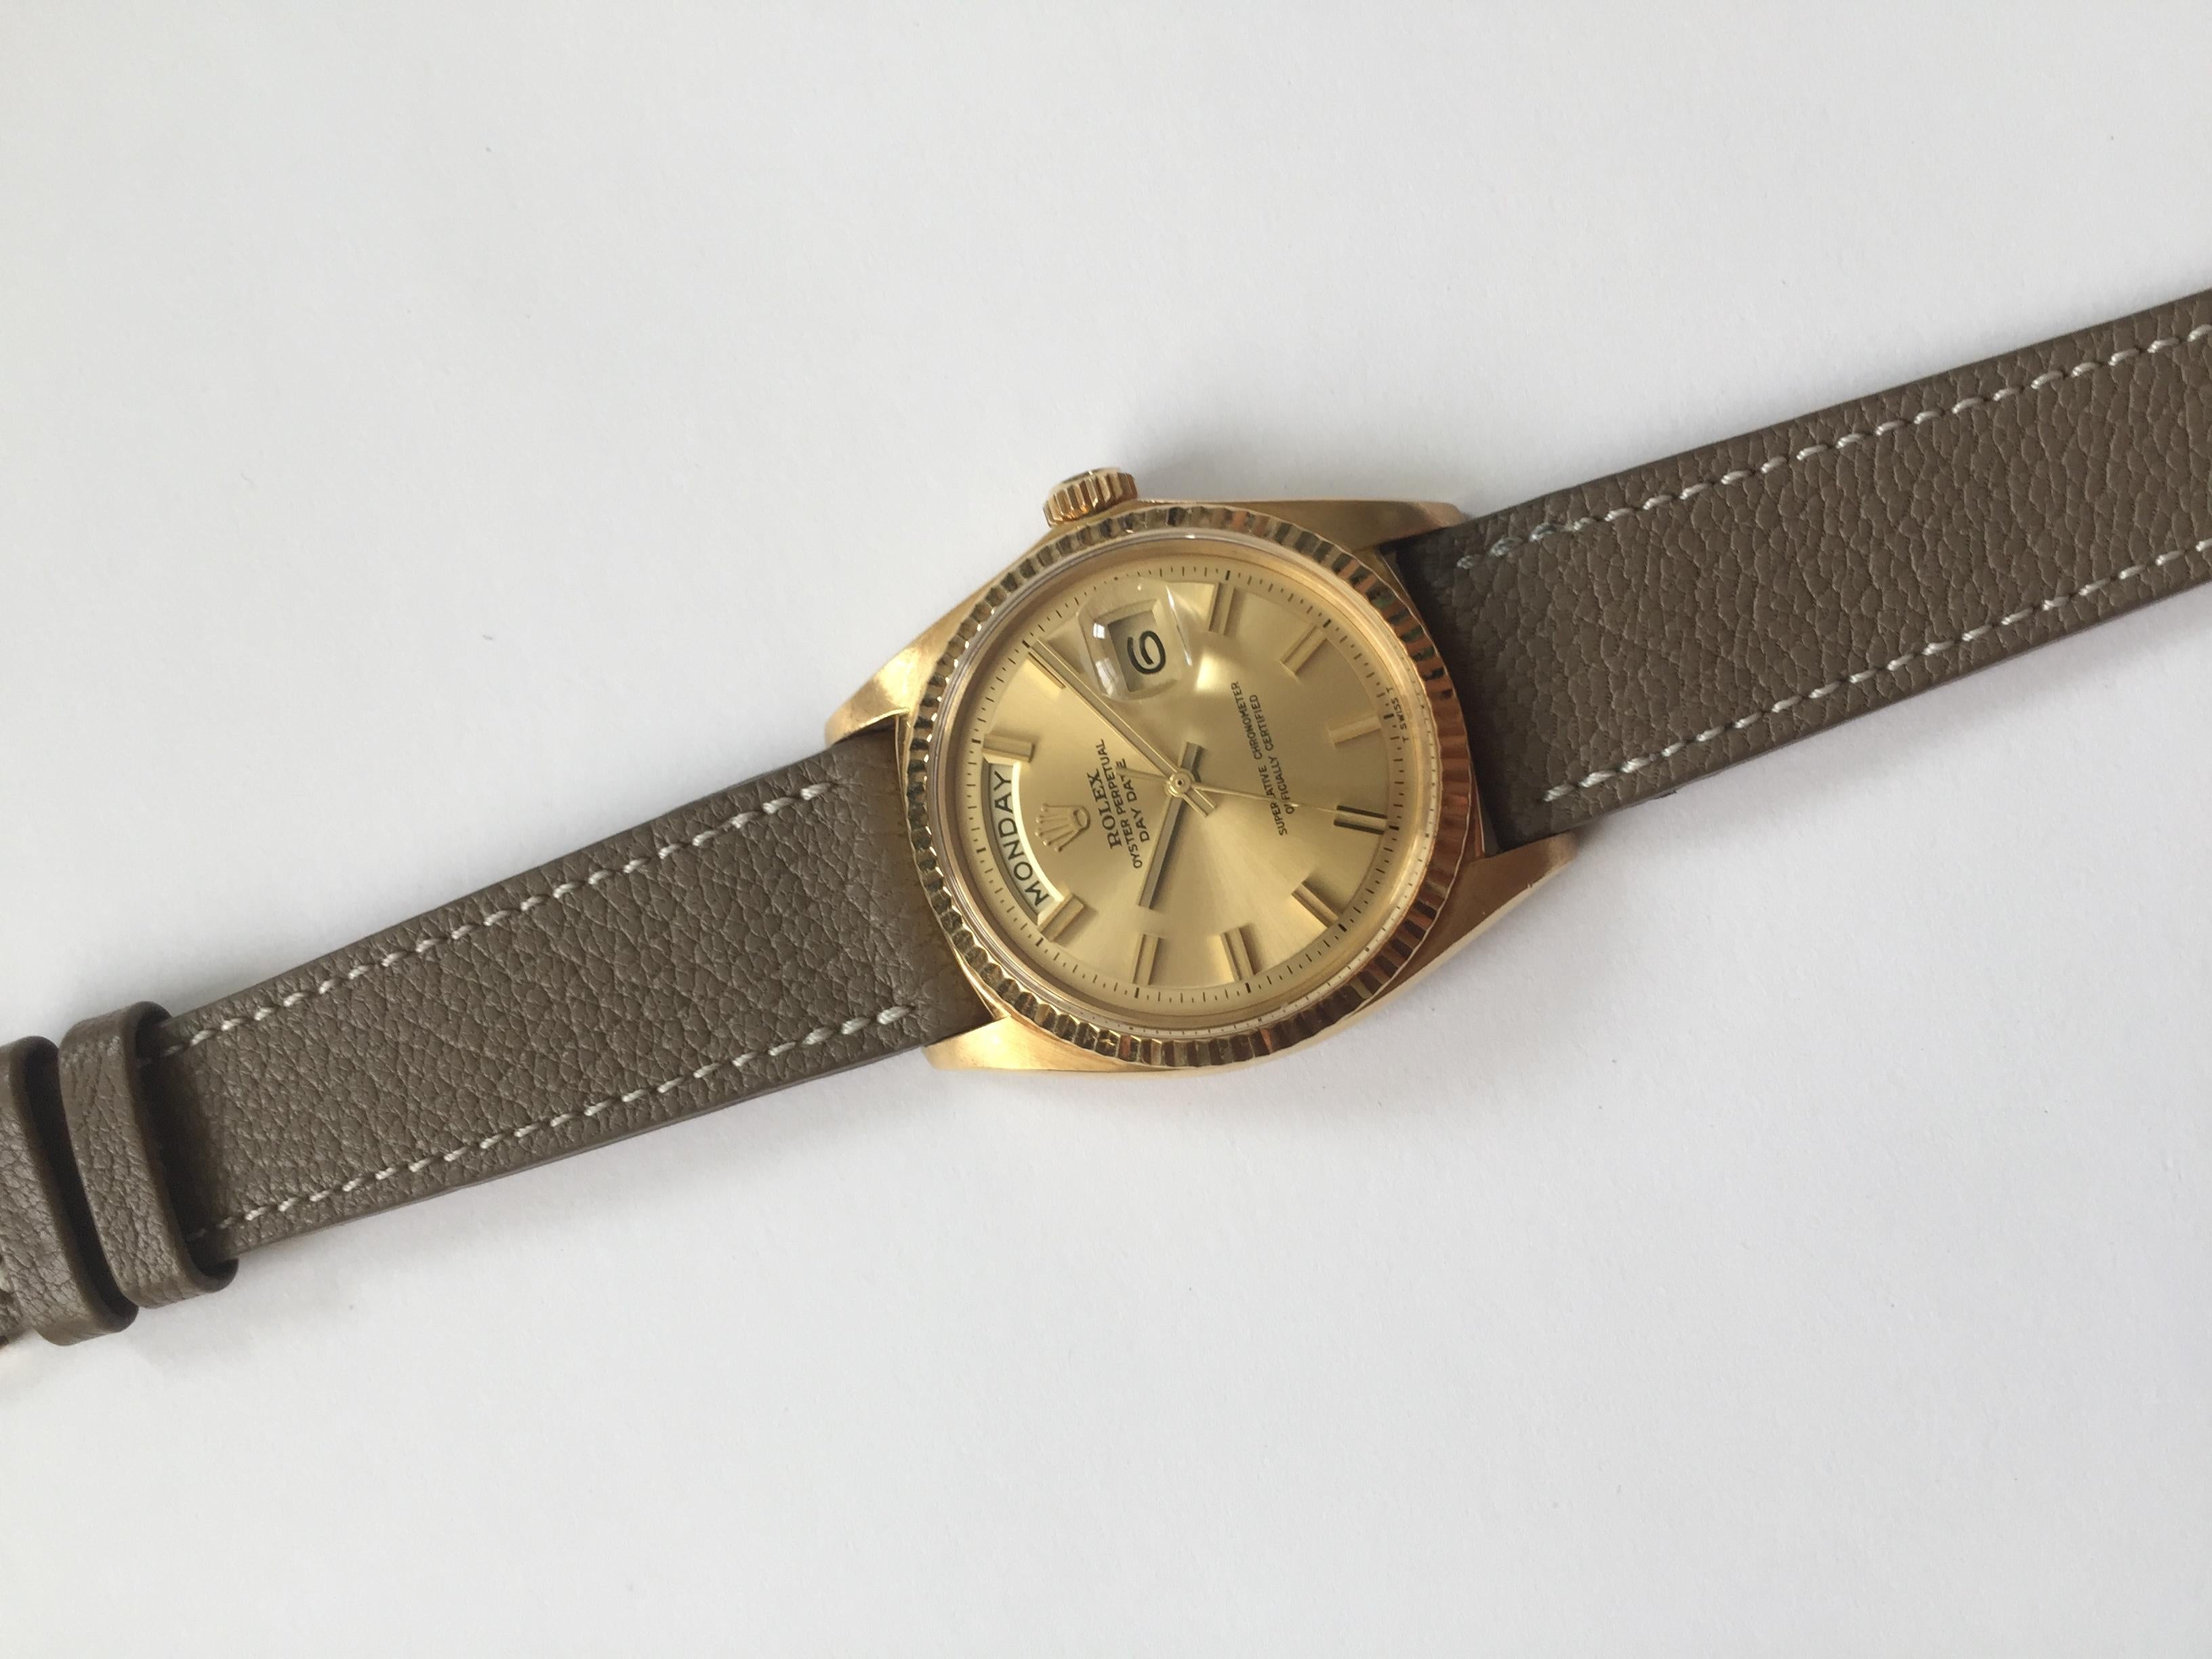 Rolex 18K Yellow Gold Day Date Wide Boy Dial Wristwatch, 1960s For Sale 1